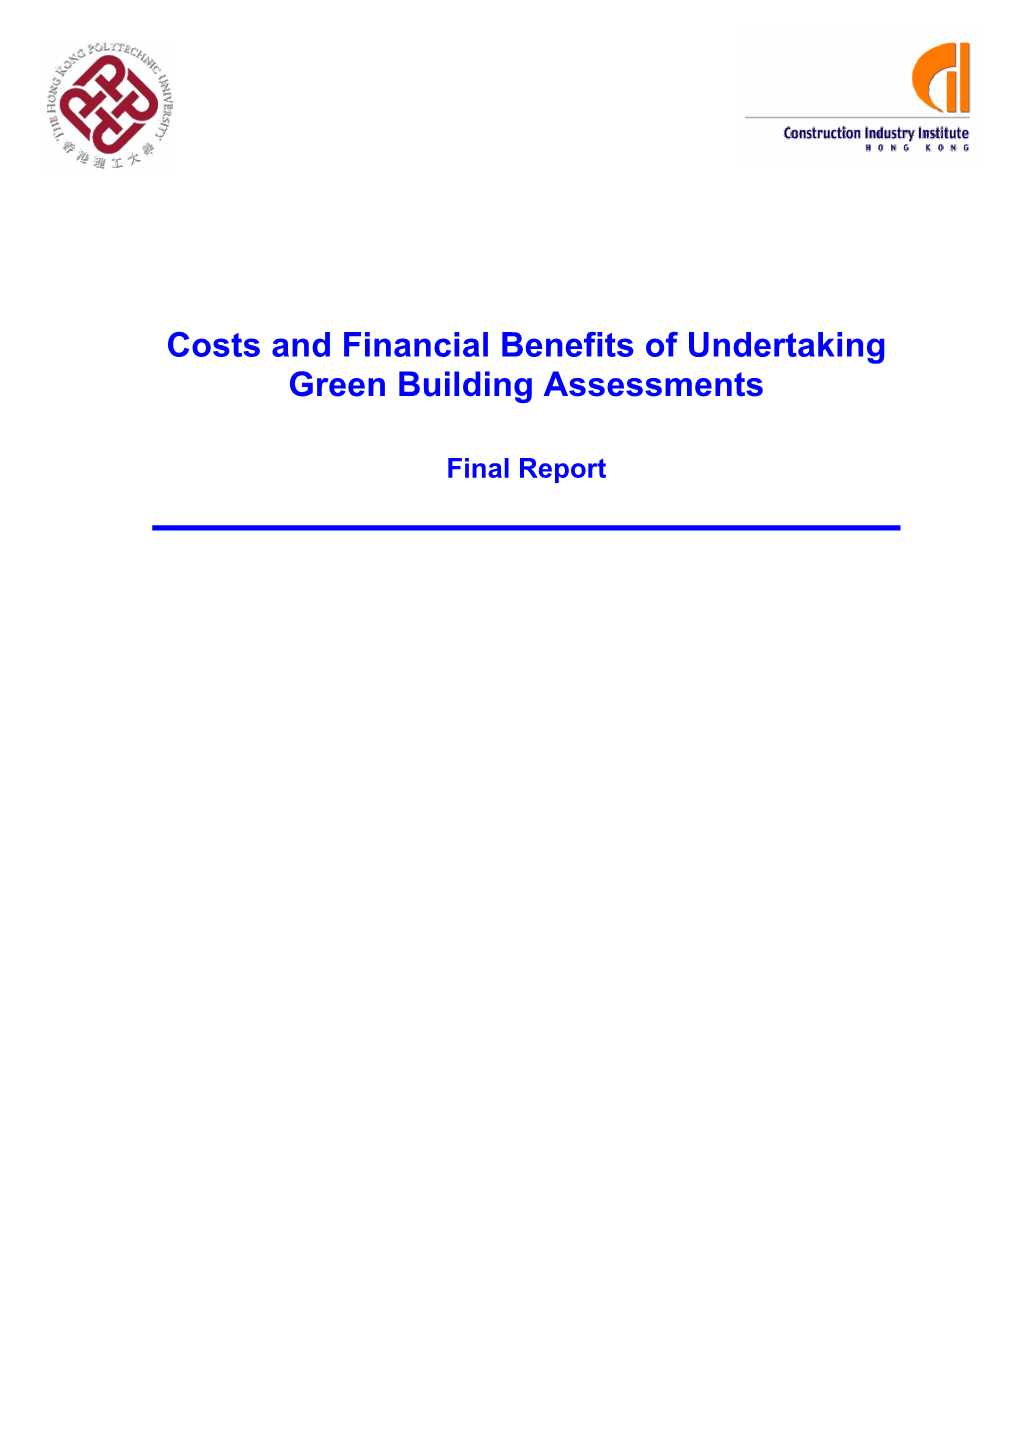 Costs and Financial Benefits of Undertaking Green Building Assessments